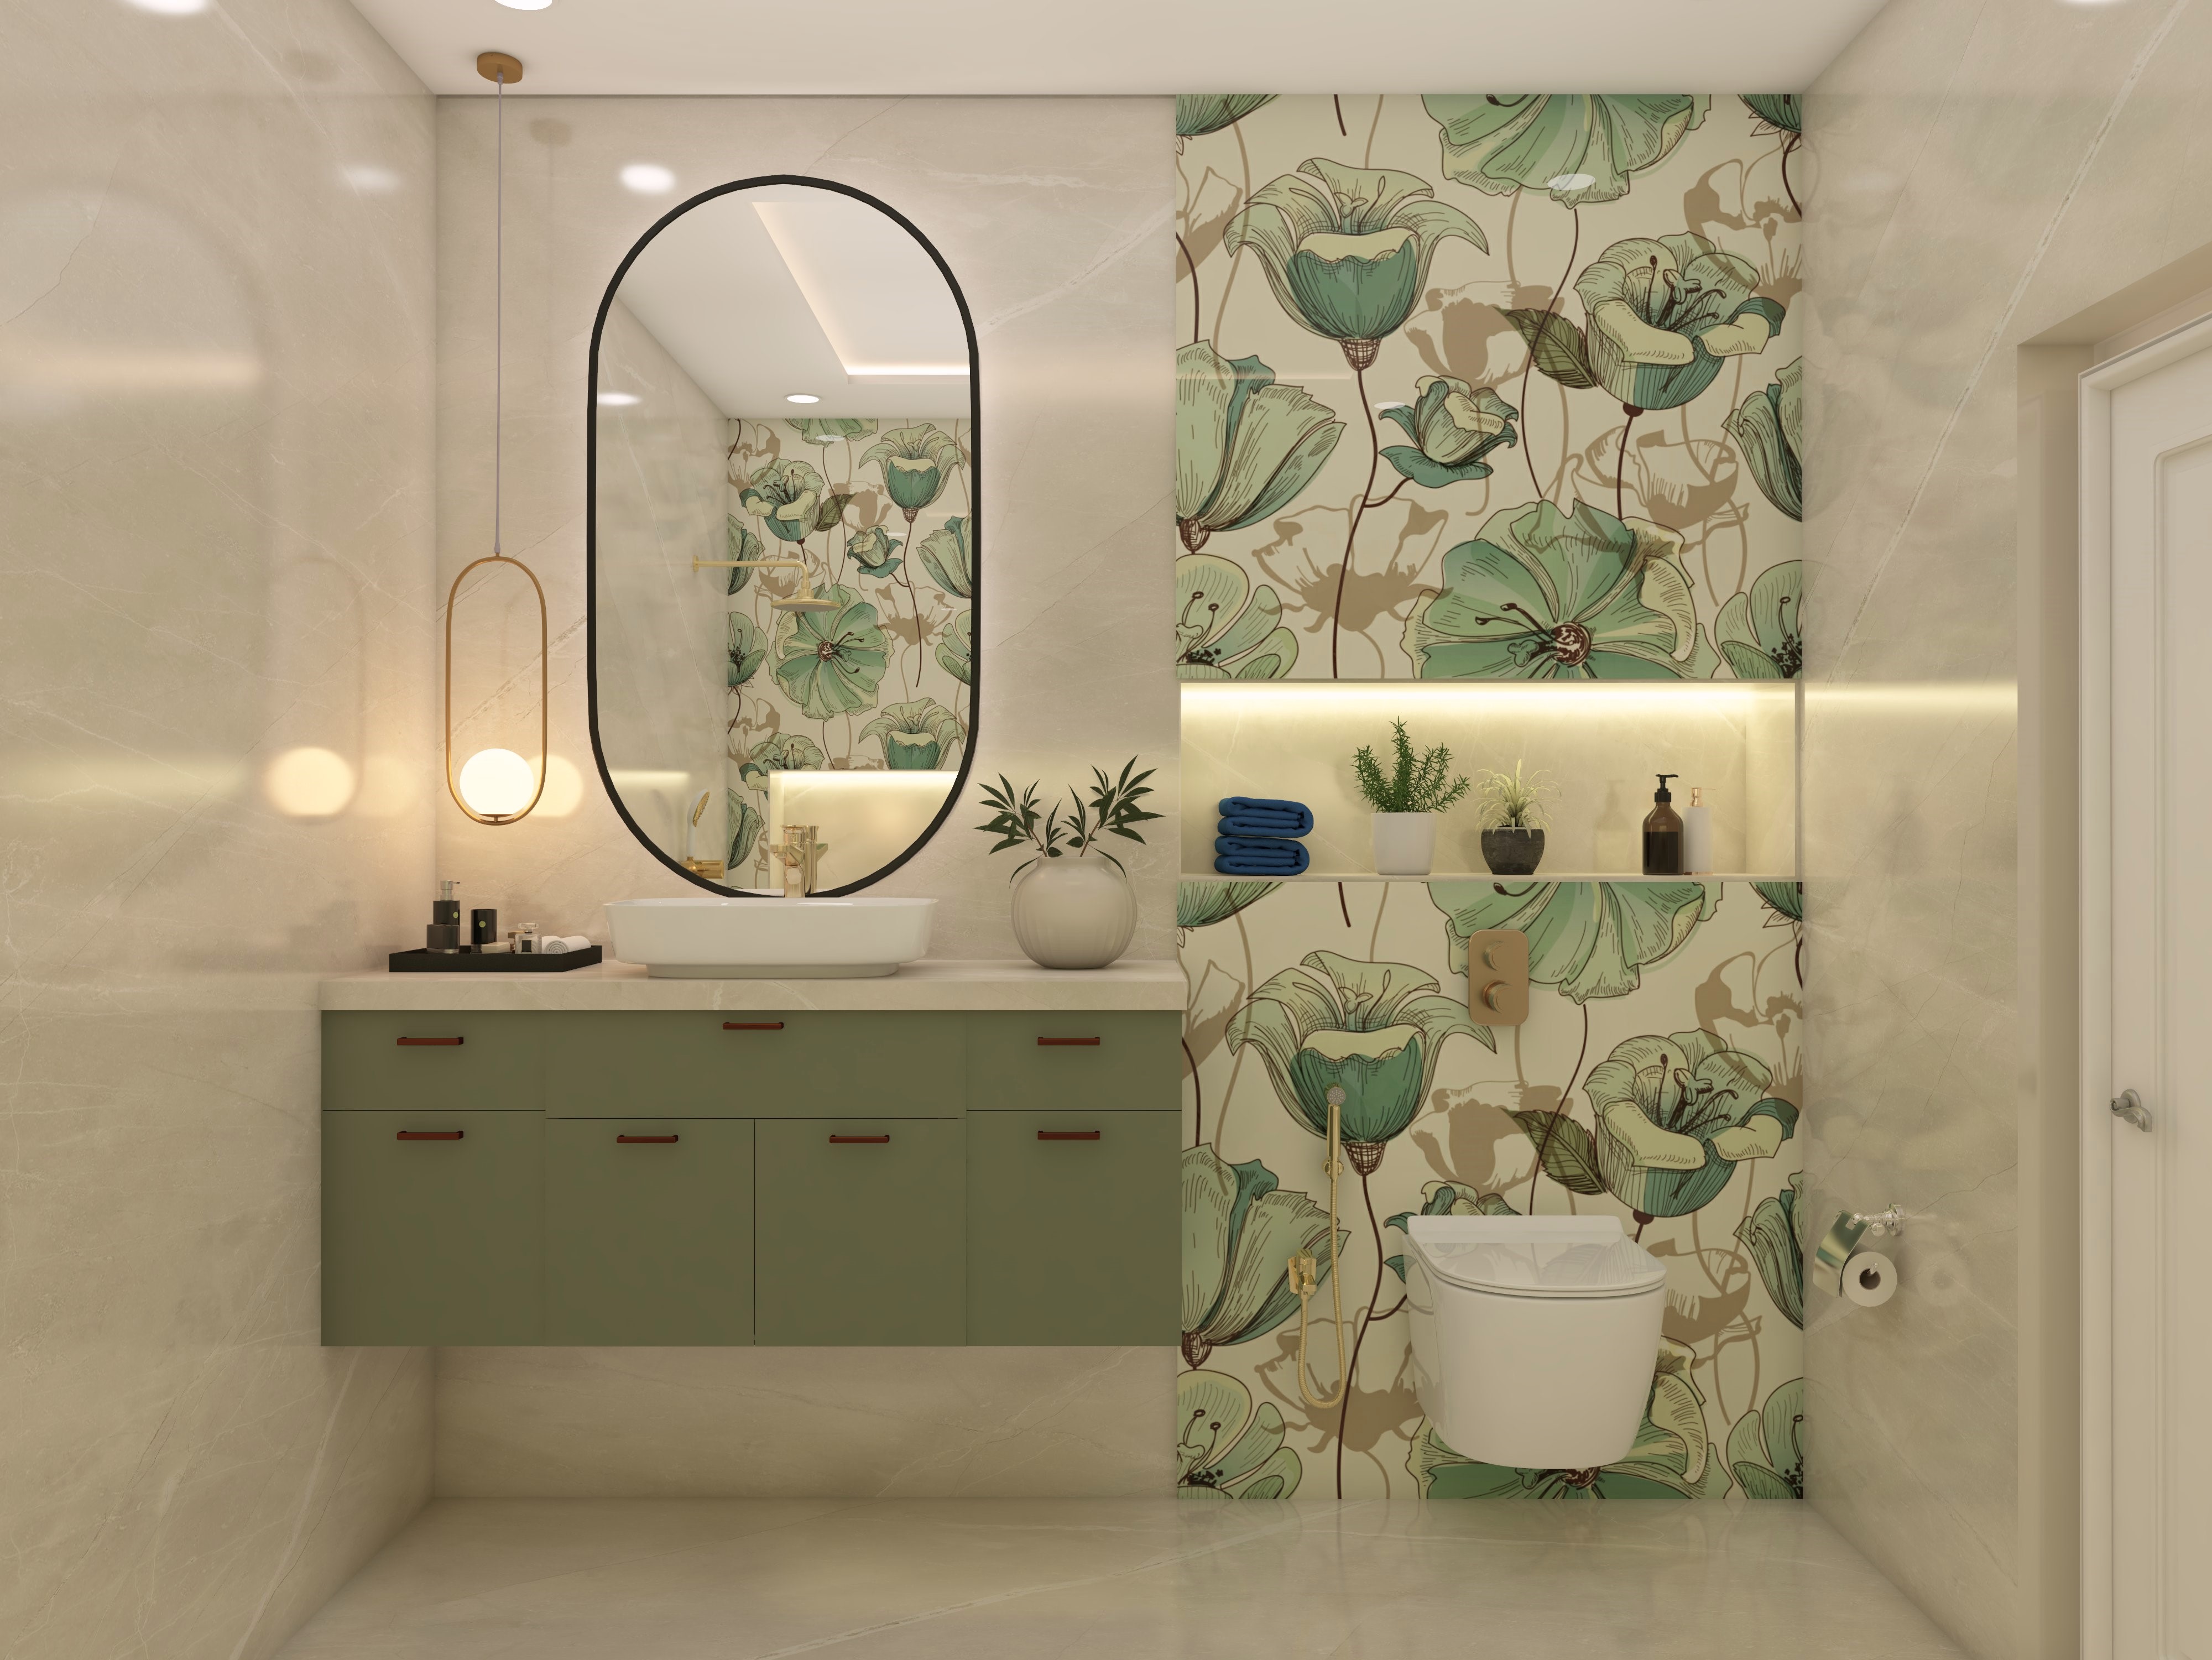 Modern bathroom with green vanity unit and Asian Paints tiles and bath fixtures